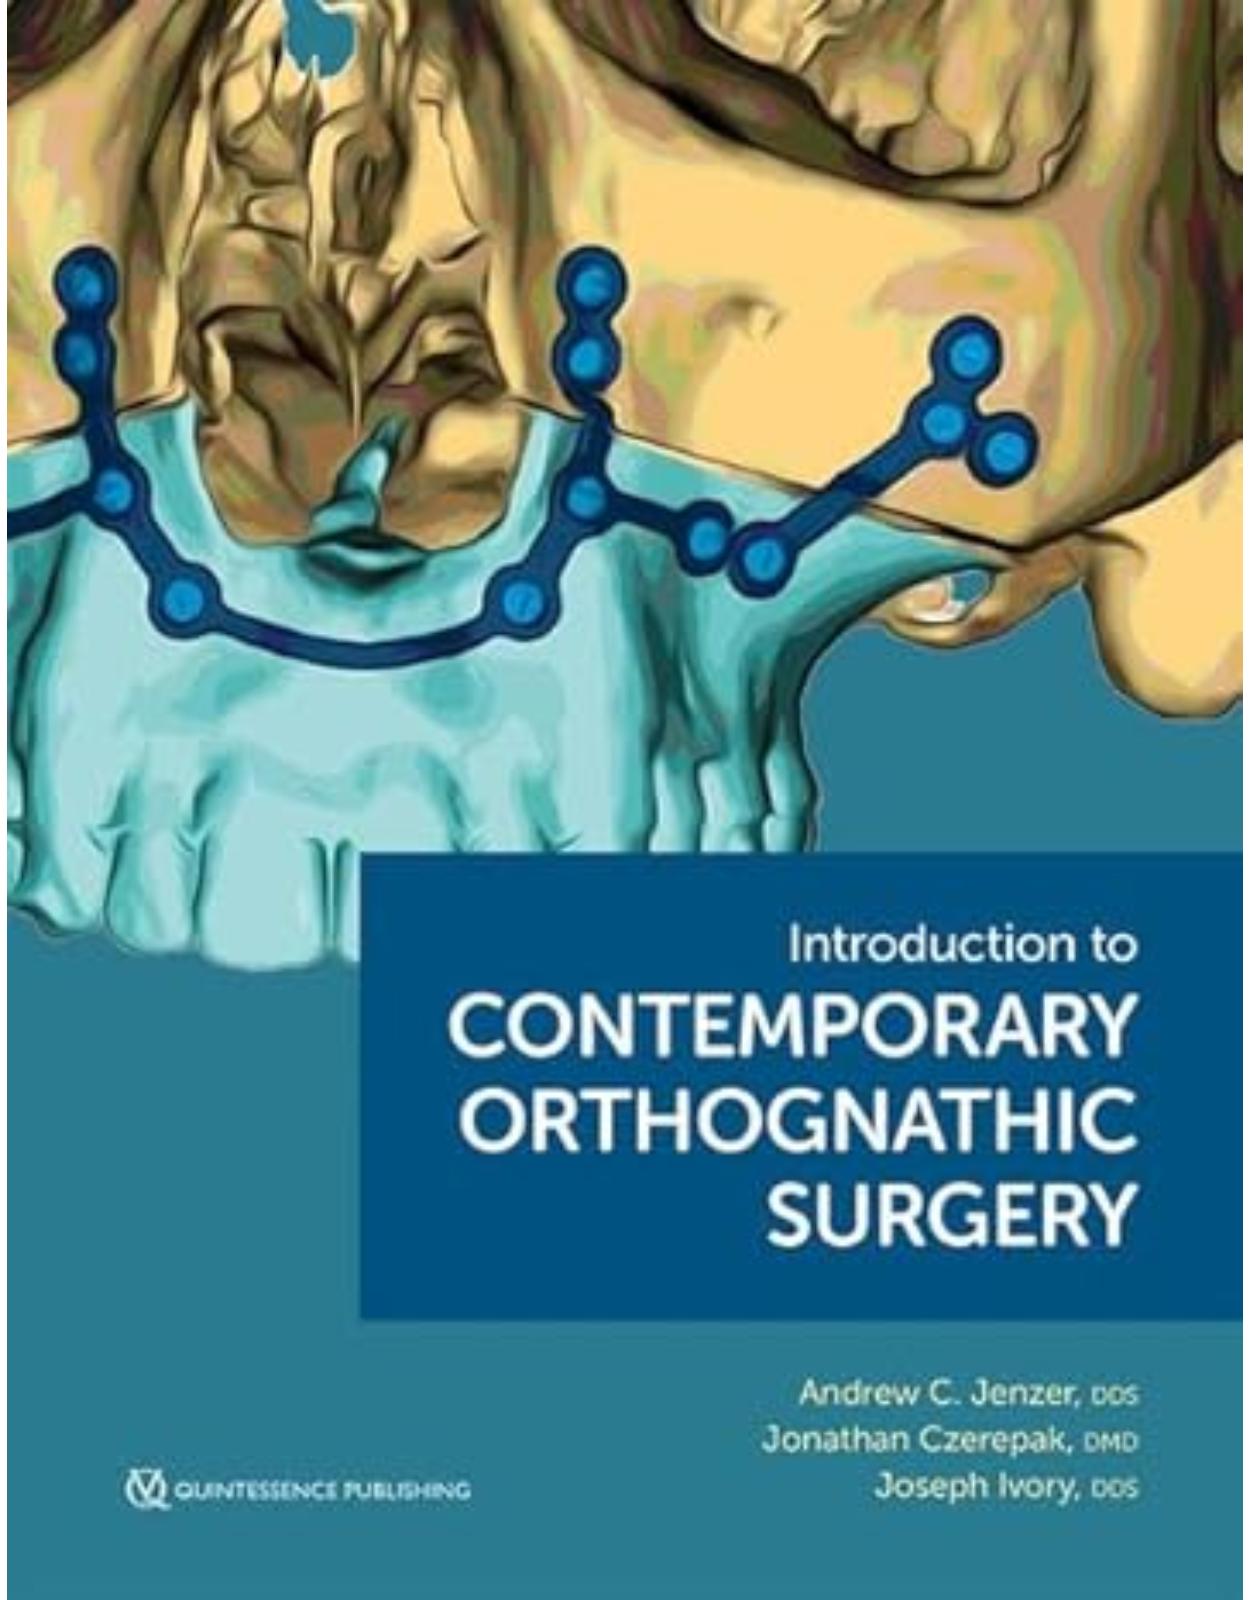 Introduction to Contemporary Orthognathic Surgery